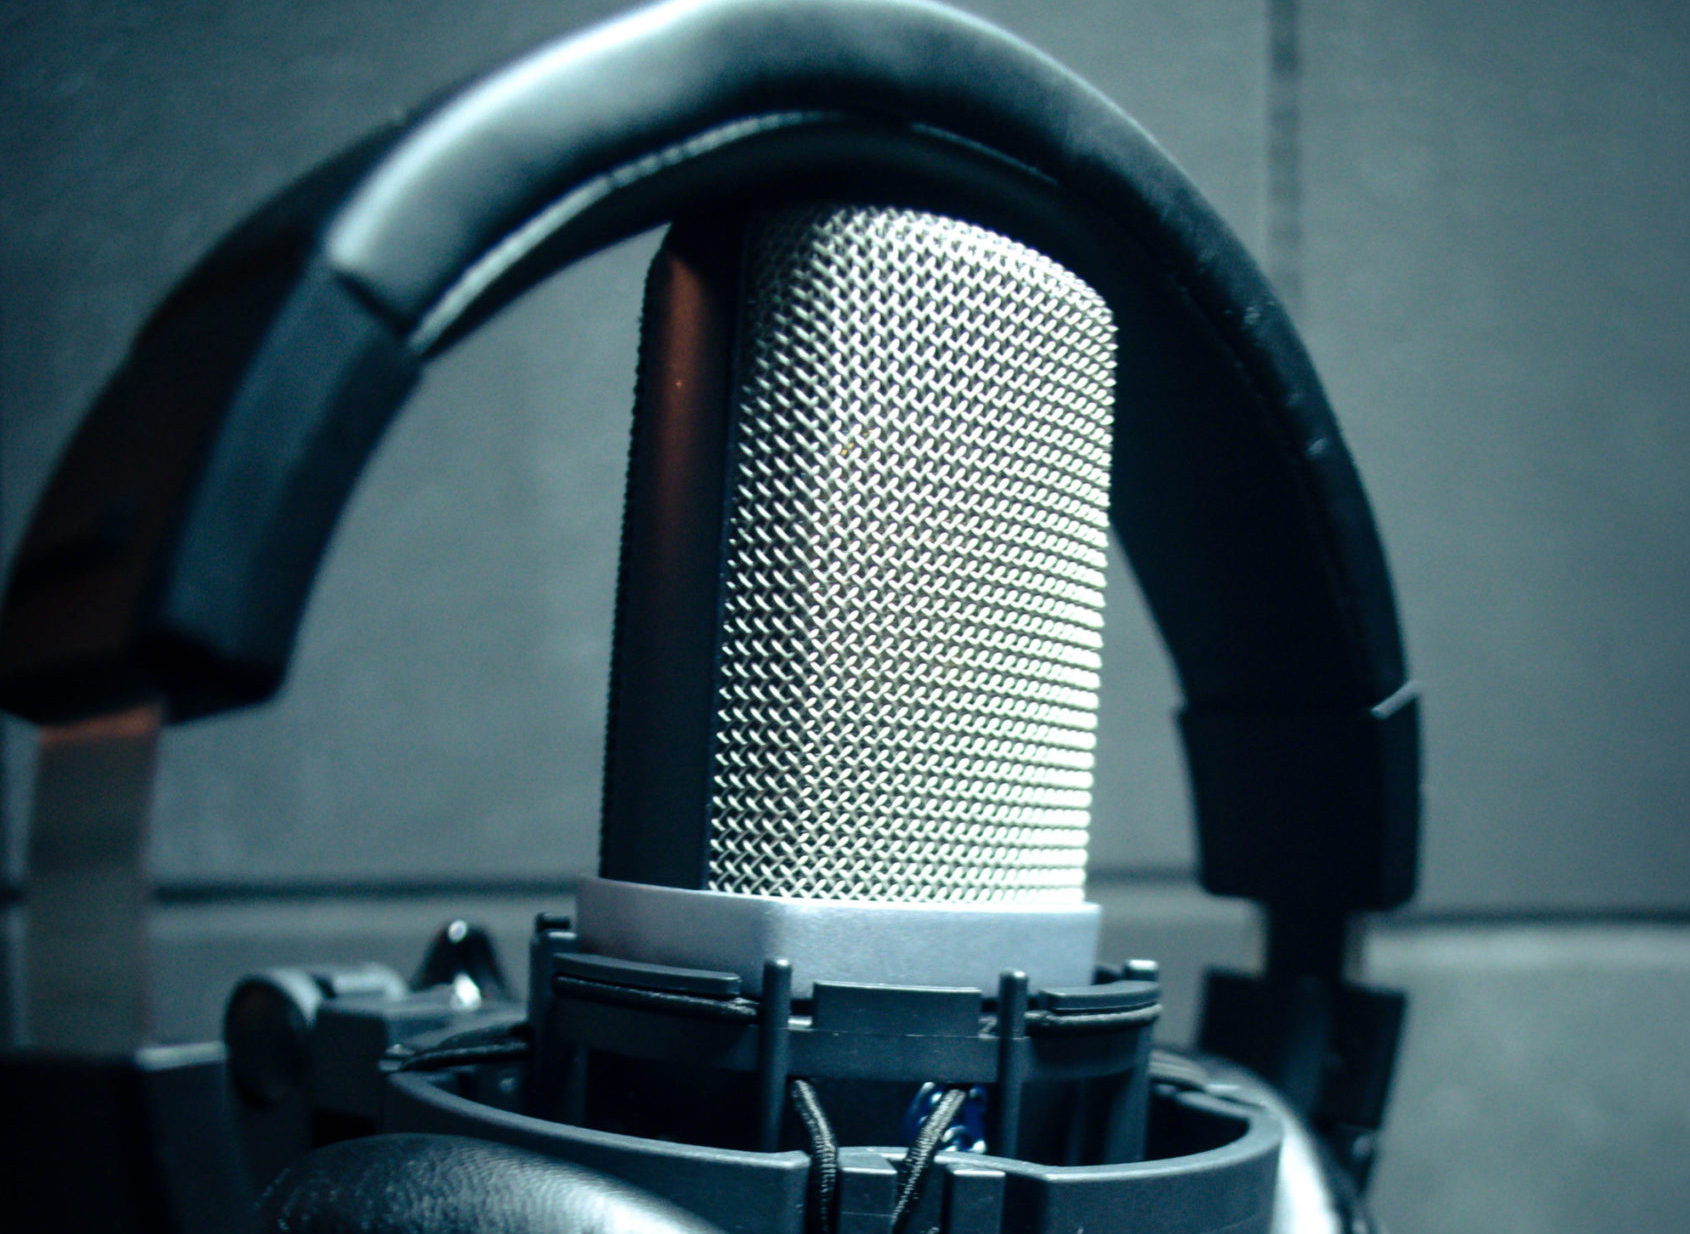 Close up photo of microphone and headphones